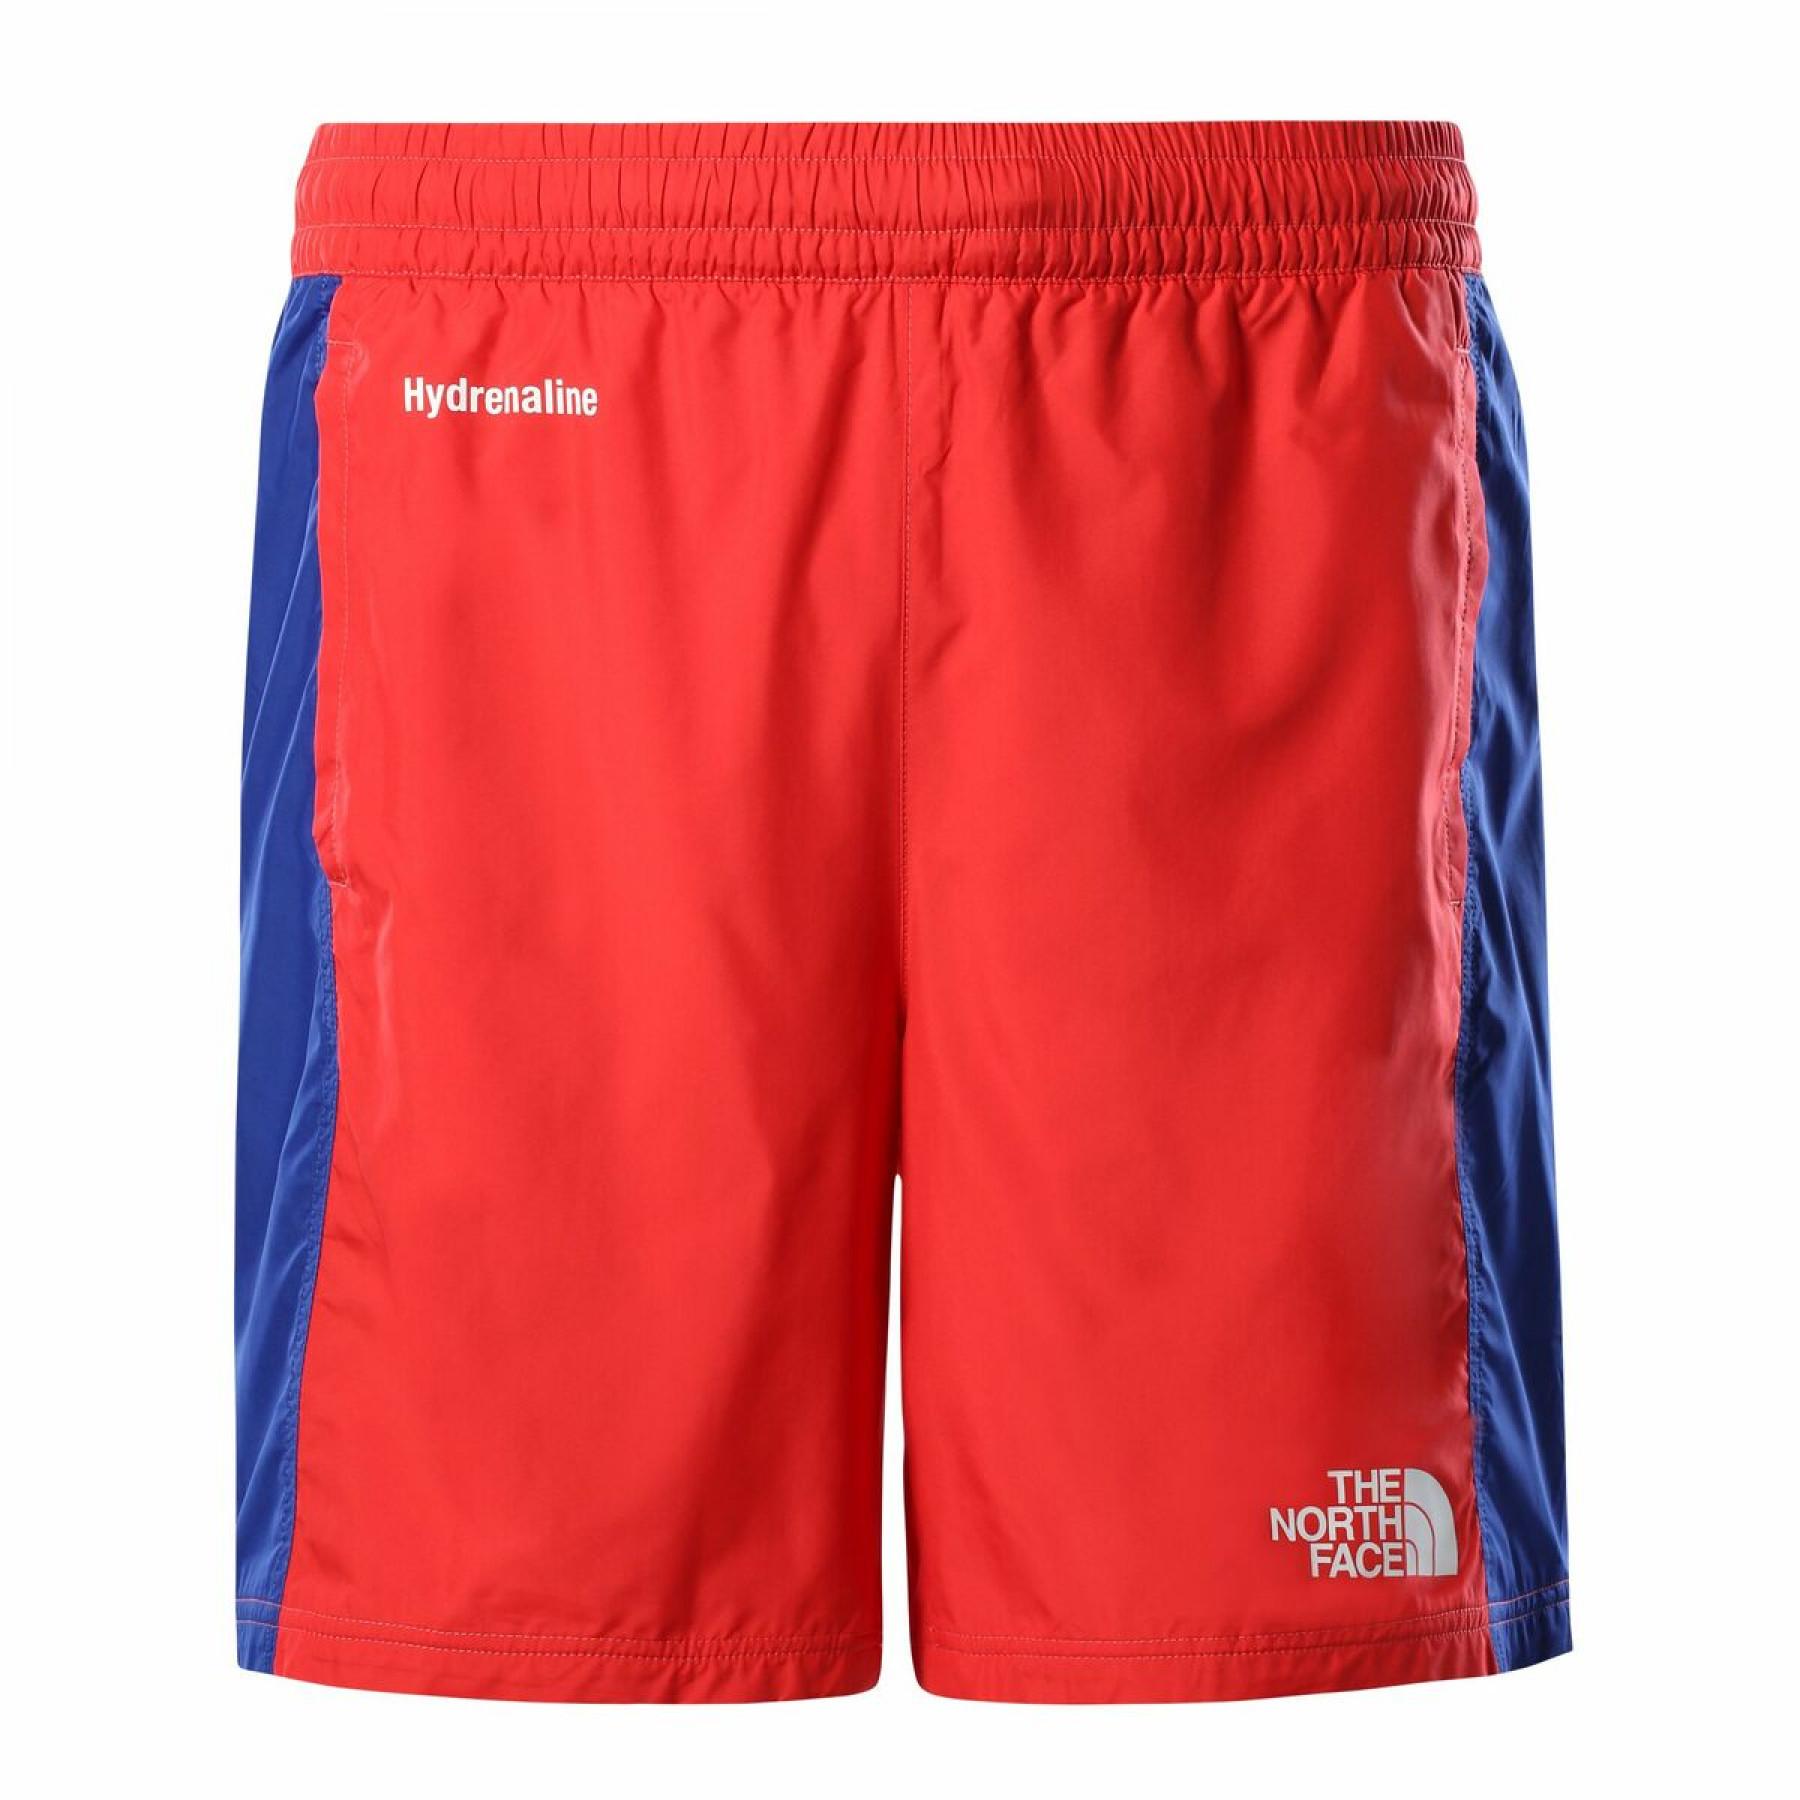 Short The North Face Hydrenaline Wind